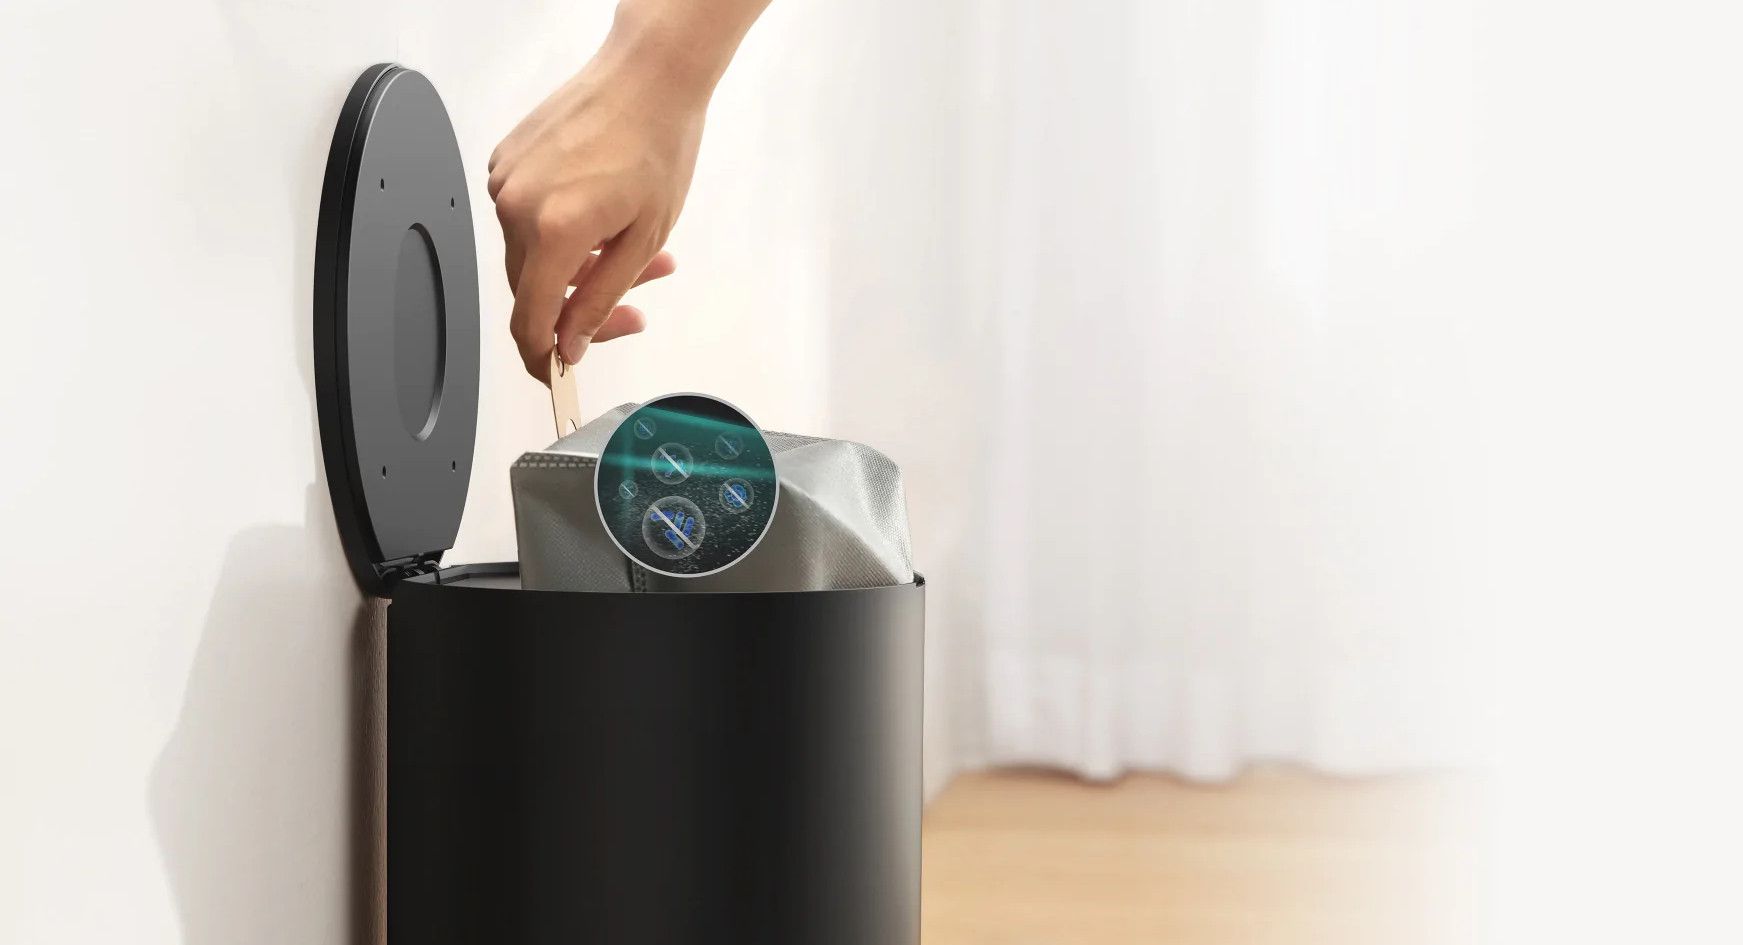 Eufy Just Launched The Eufy Clean RoboVac L35 Hybrid, Eufy's First